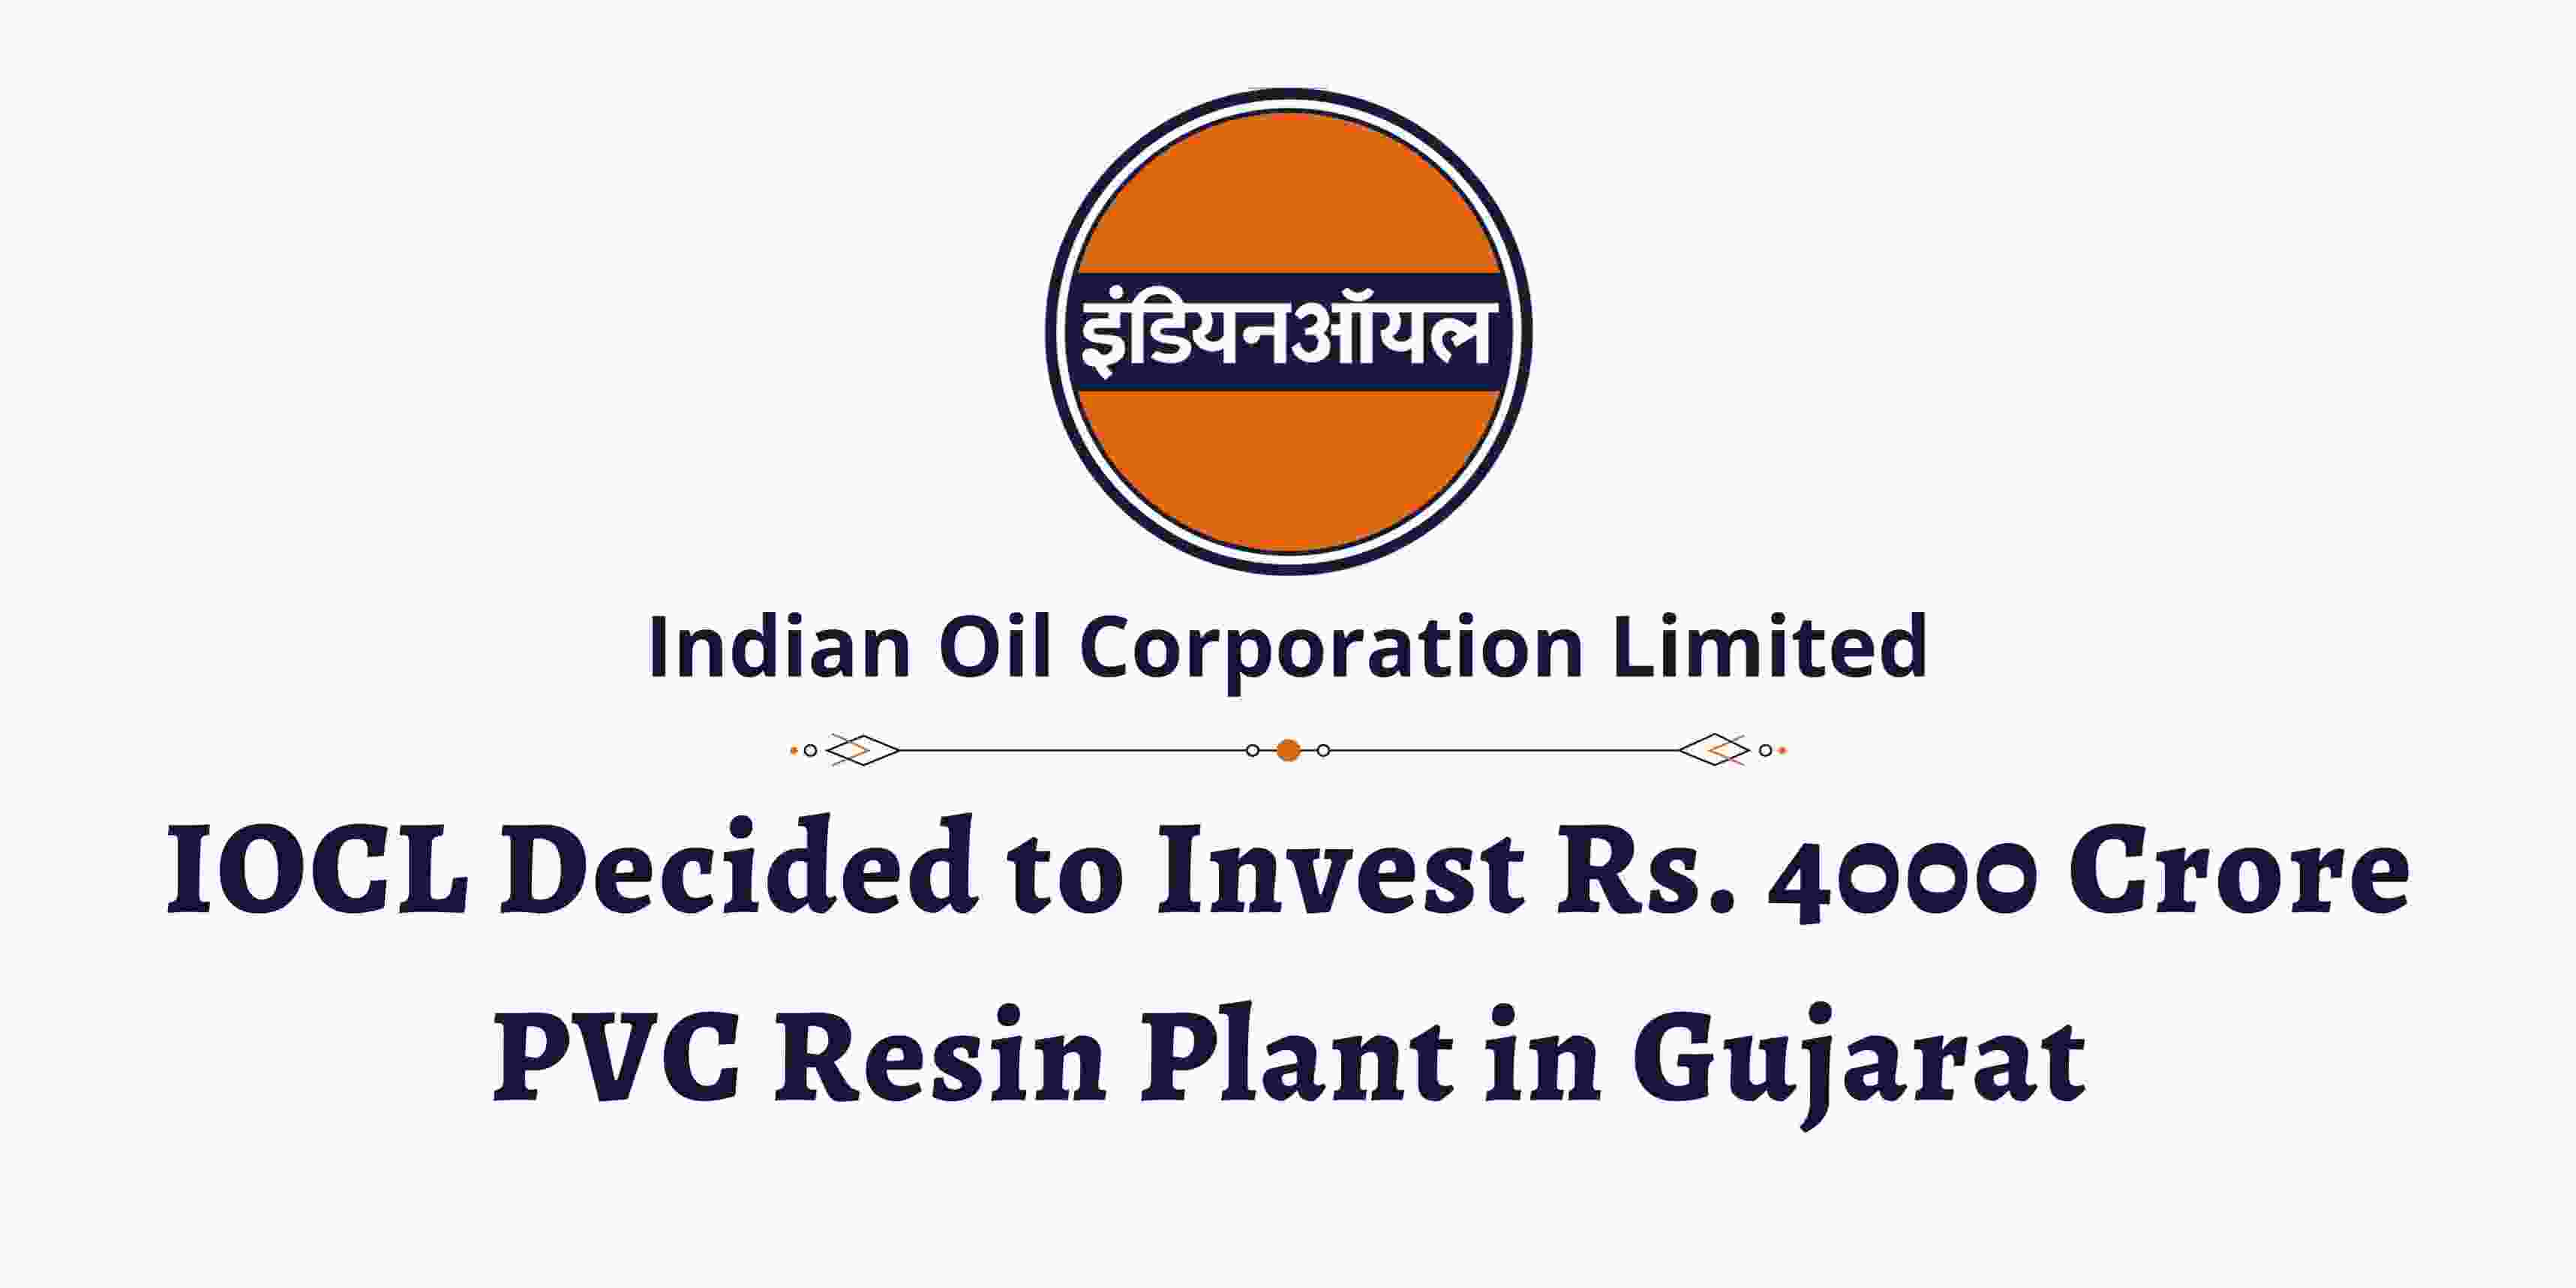 IOCL Decided to Invest Rs. 4000 Crore PVC Resin Plant in Gujarat Plastic4trade